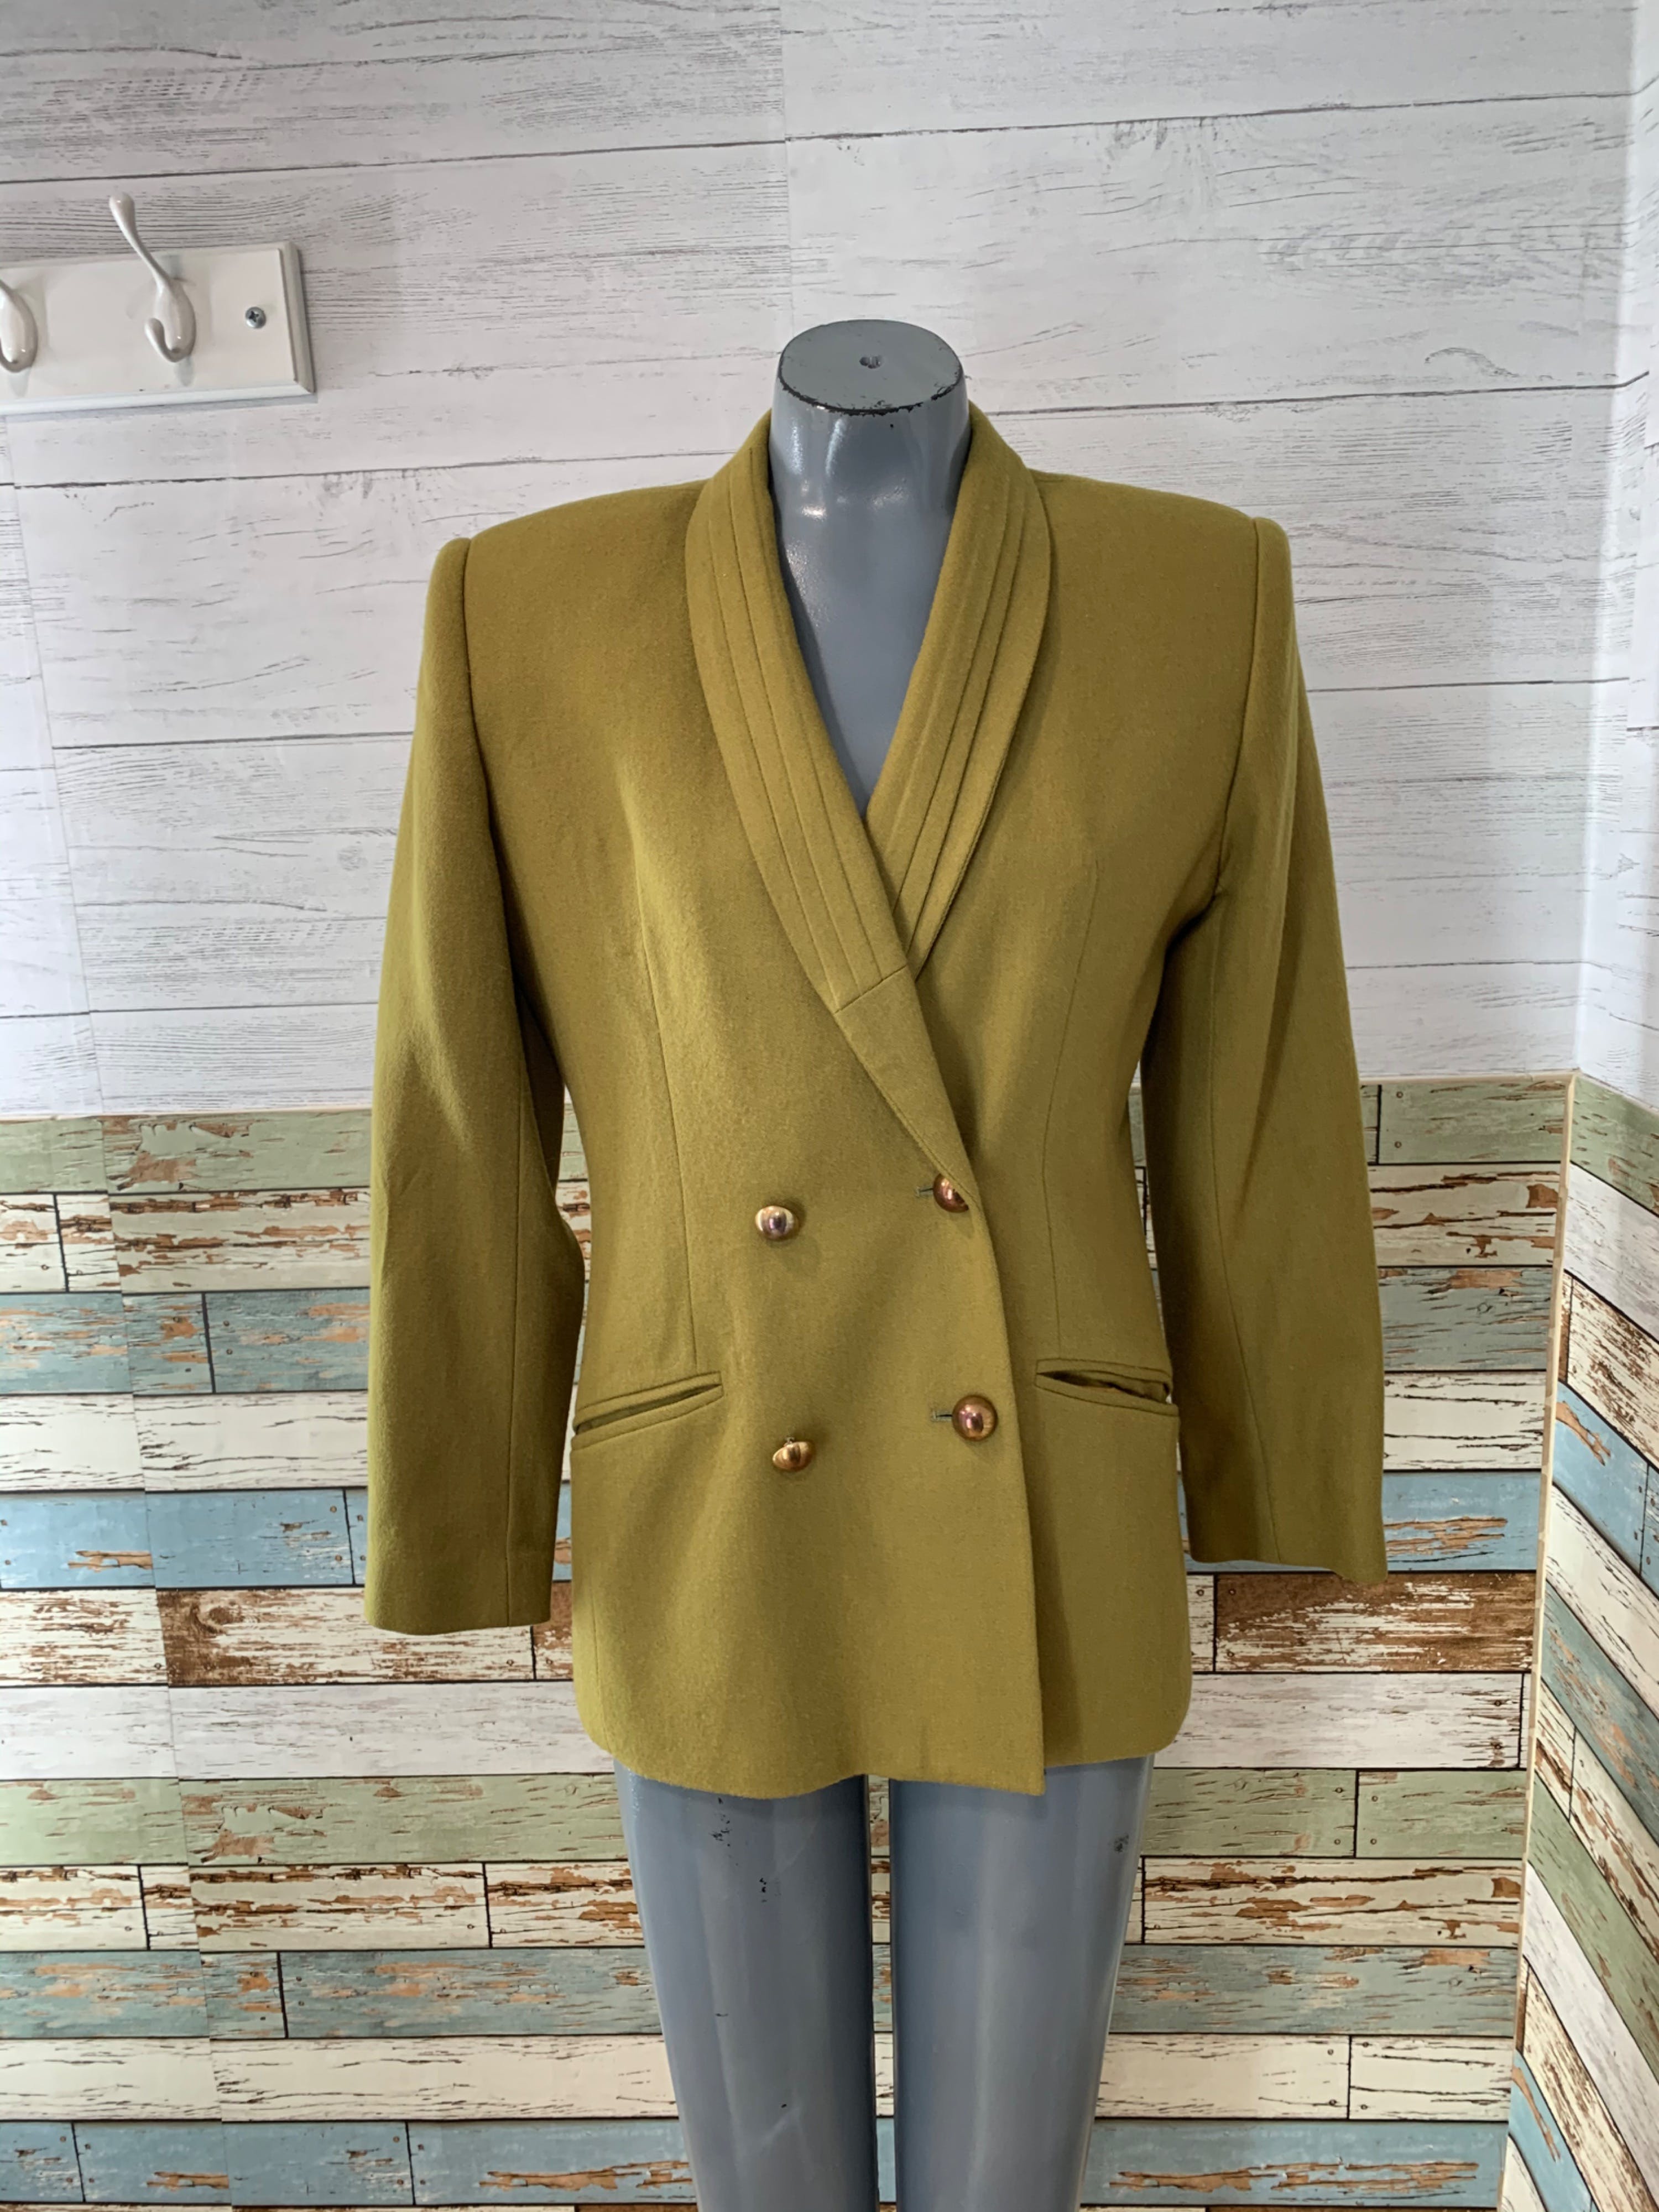 Vintage 90's Double Breasted Suit Jacket by Oleg Cassini | Shop THRILLING